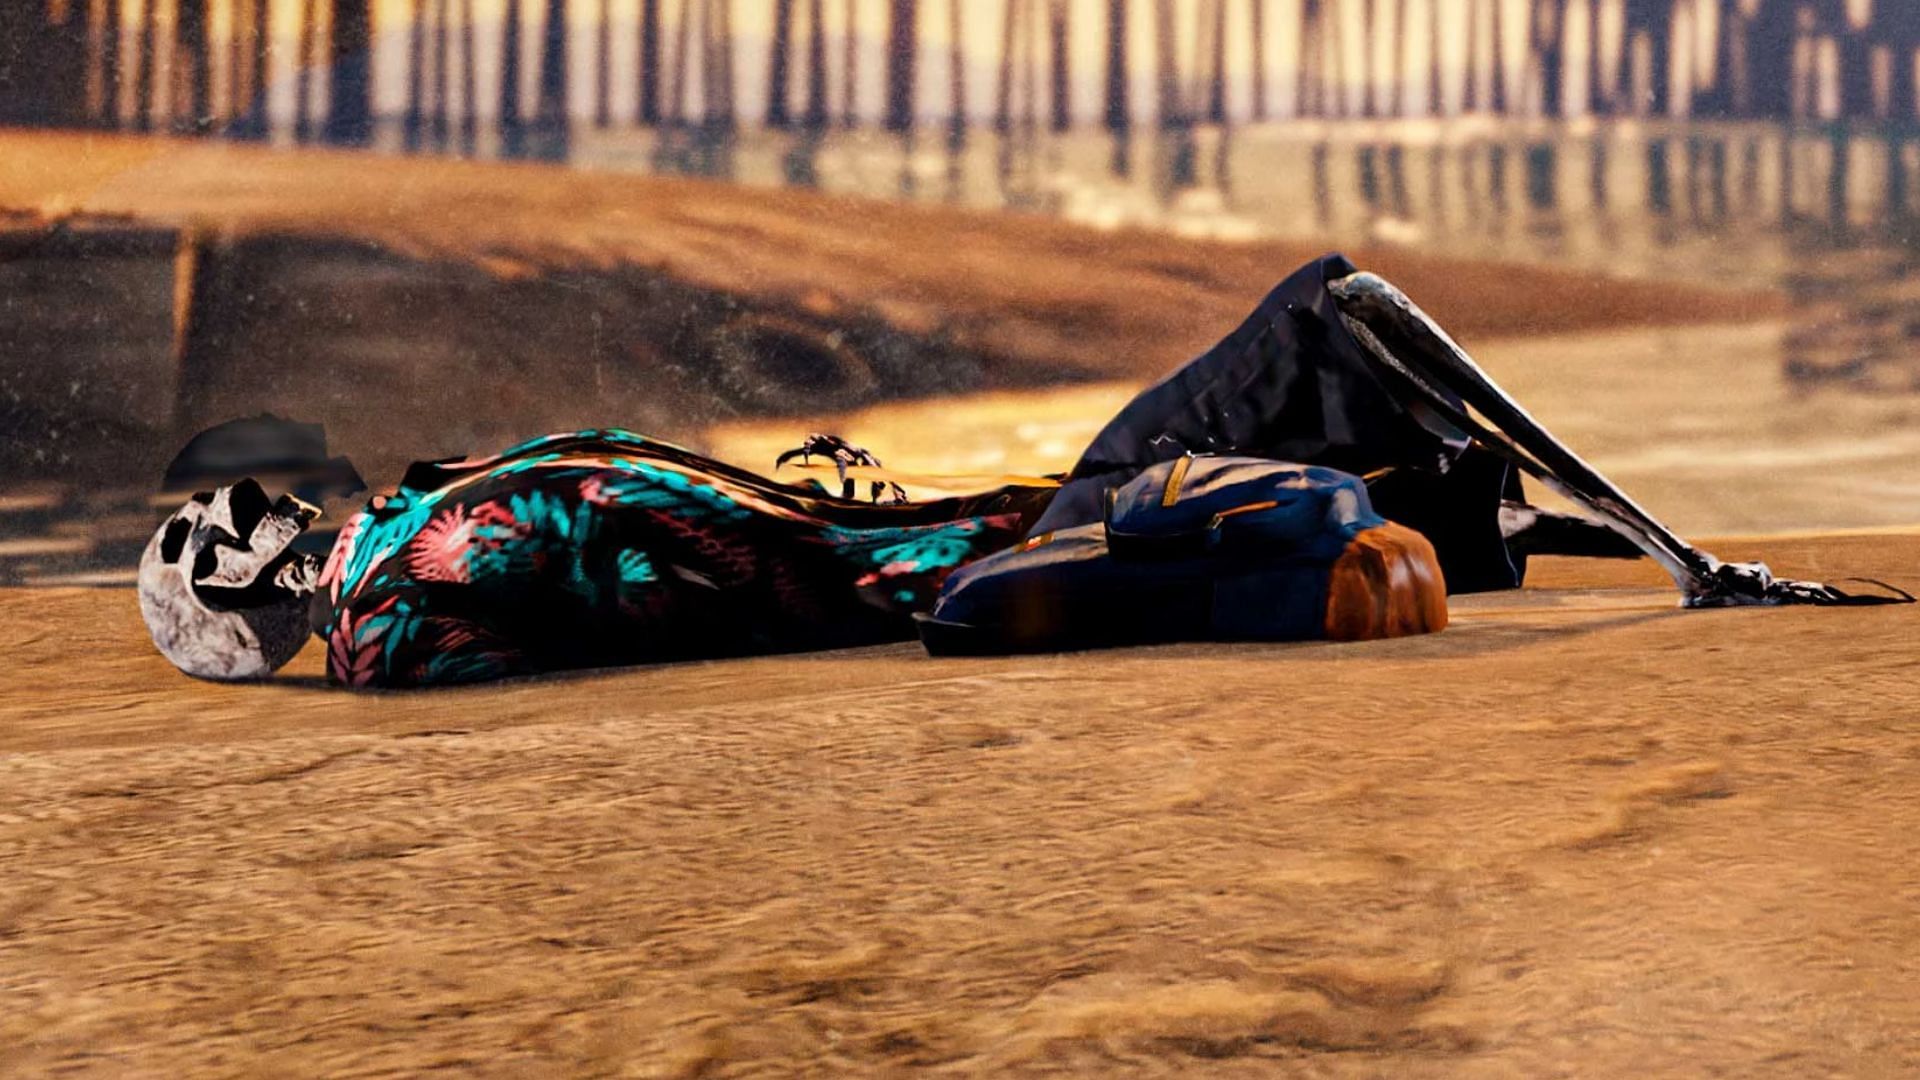 The metal detector will be near this corpse (Image via Rockstar Games)